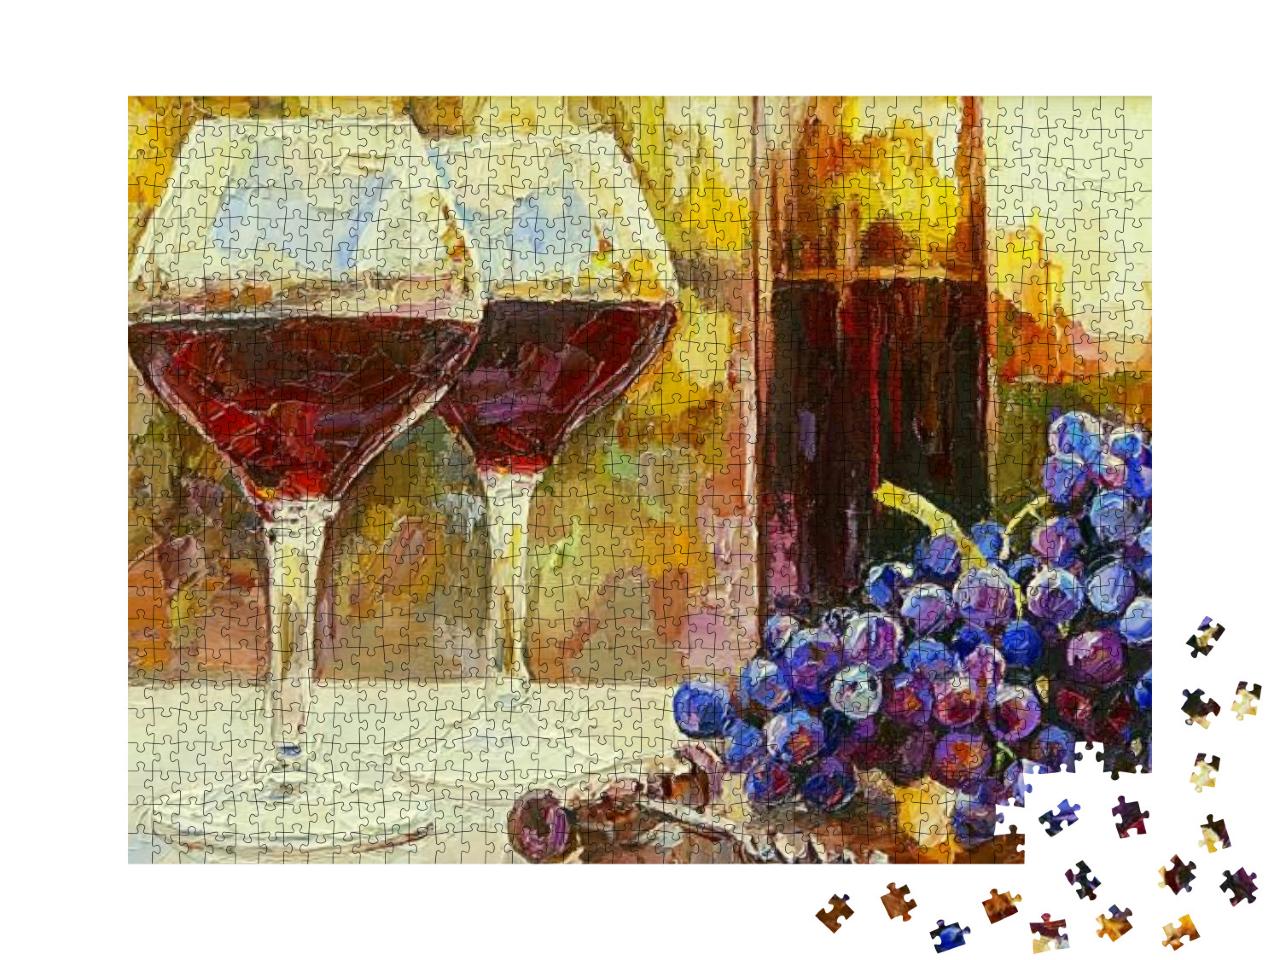 Still Life with a Bottle of Red Wine & Grape At the Sunse... Jigsaw Puzzle with 1000 pieces